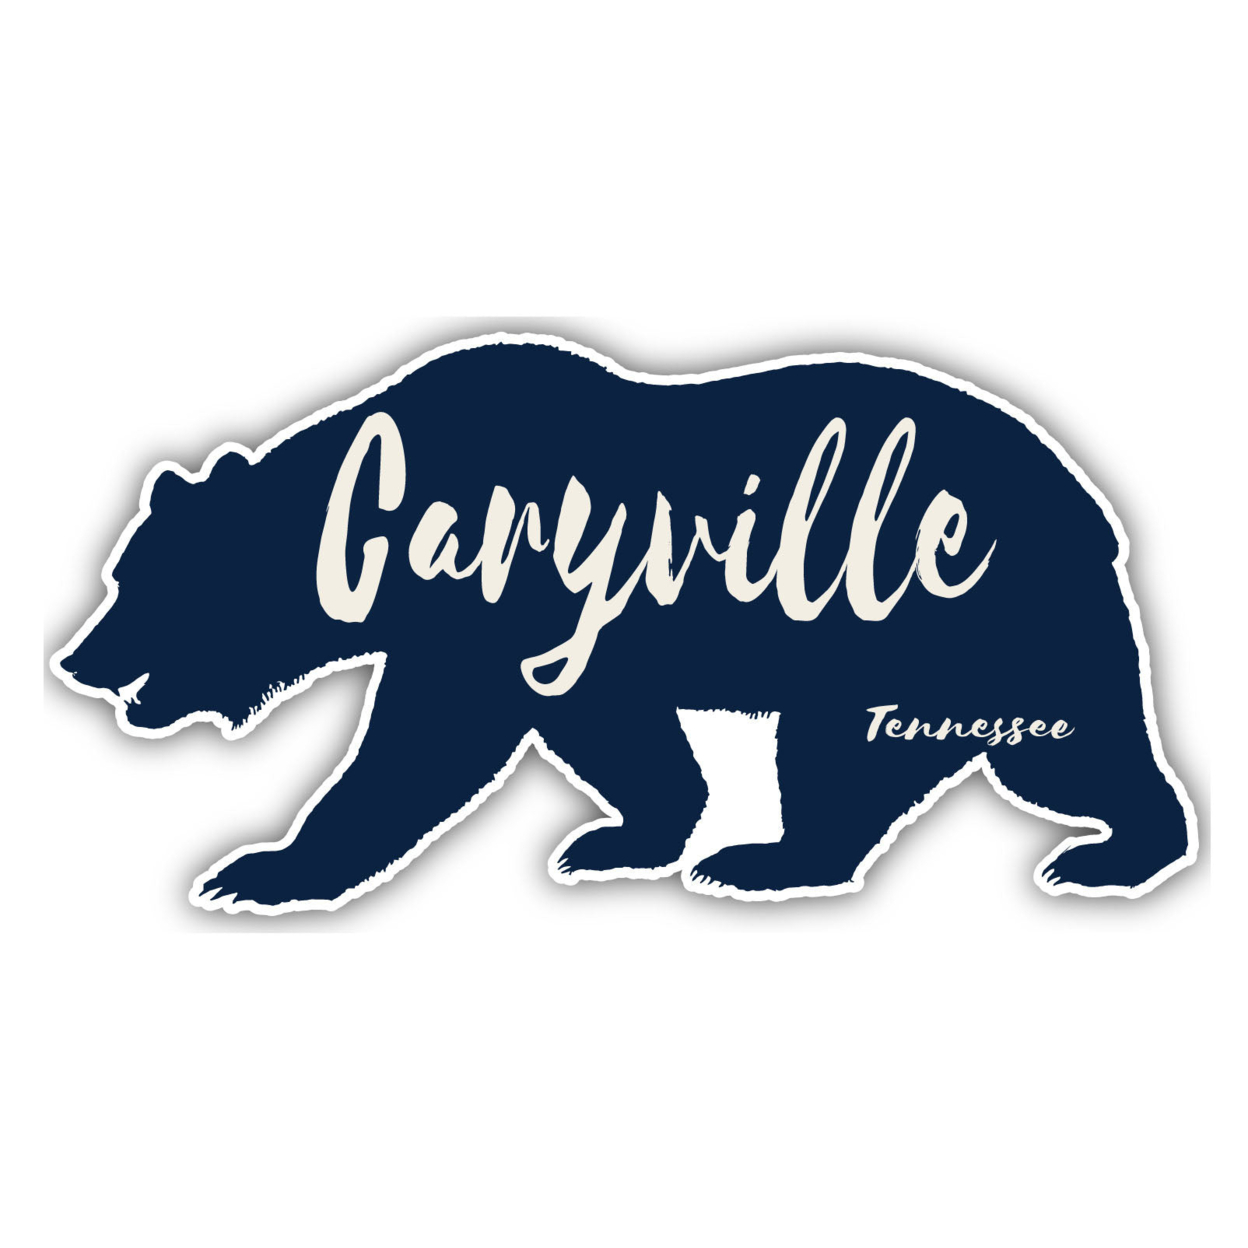 Caryville Tennessee Souvenir Decorative Stickers (Choose Theme And Size) - 4-Pack, 8-Inch, Bear